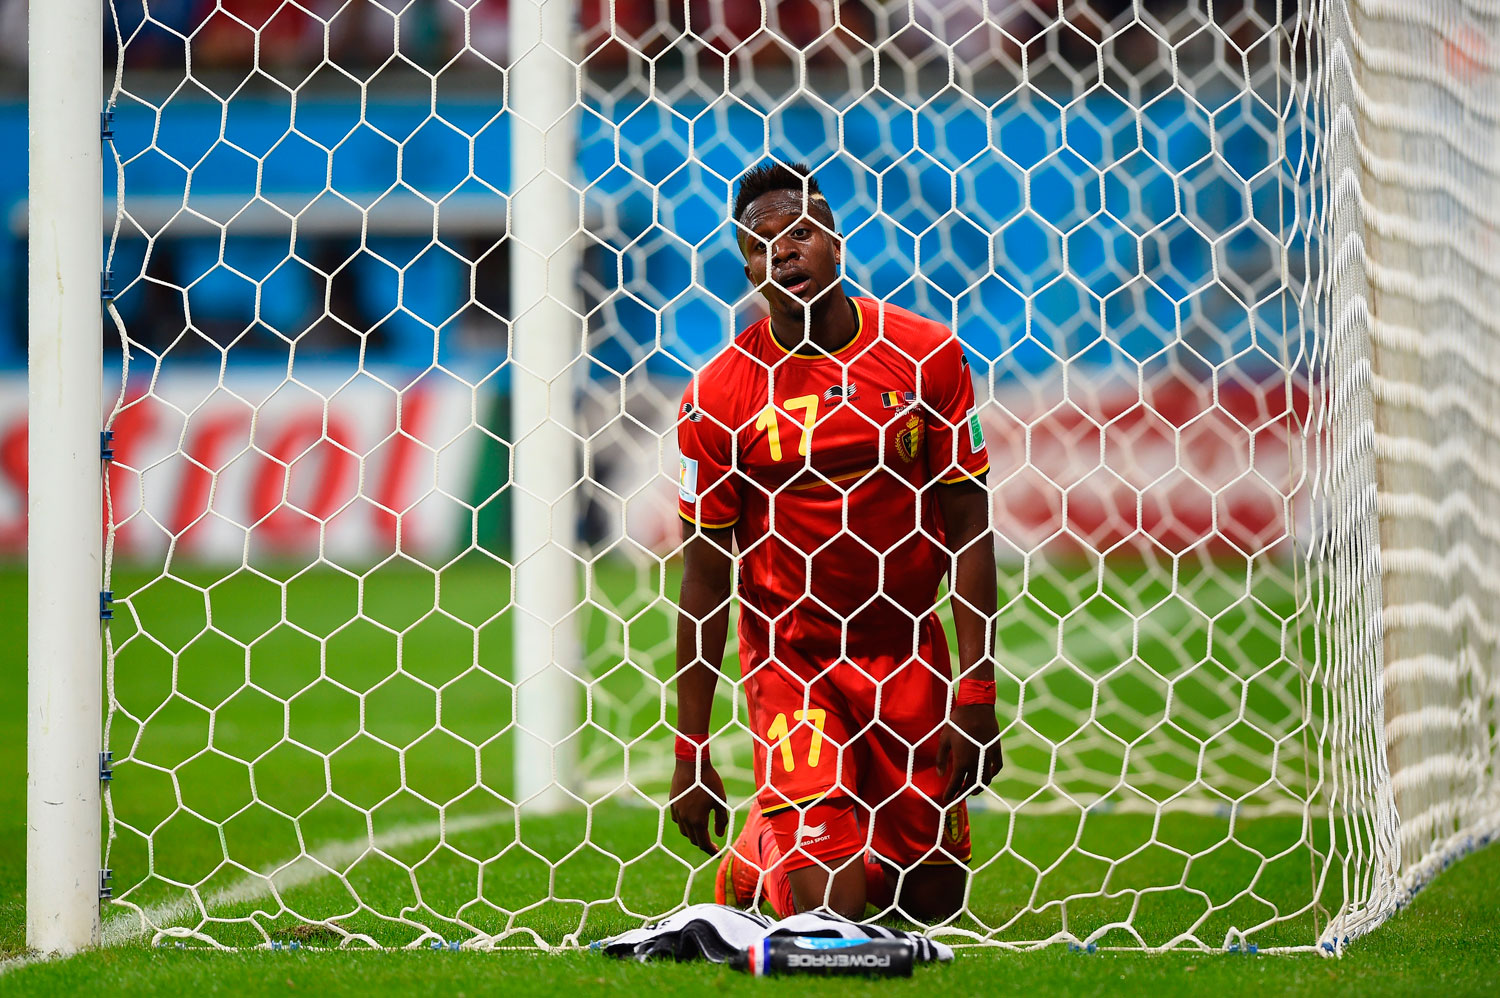 Divock Origi of Belgium reacts after a missed chance during the match between Belgium and the United States at Arena Fonte Nova on July 1, 2014 in Salvador, Brazil.